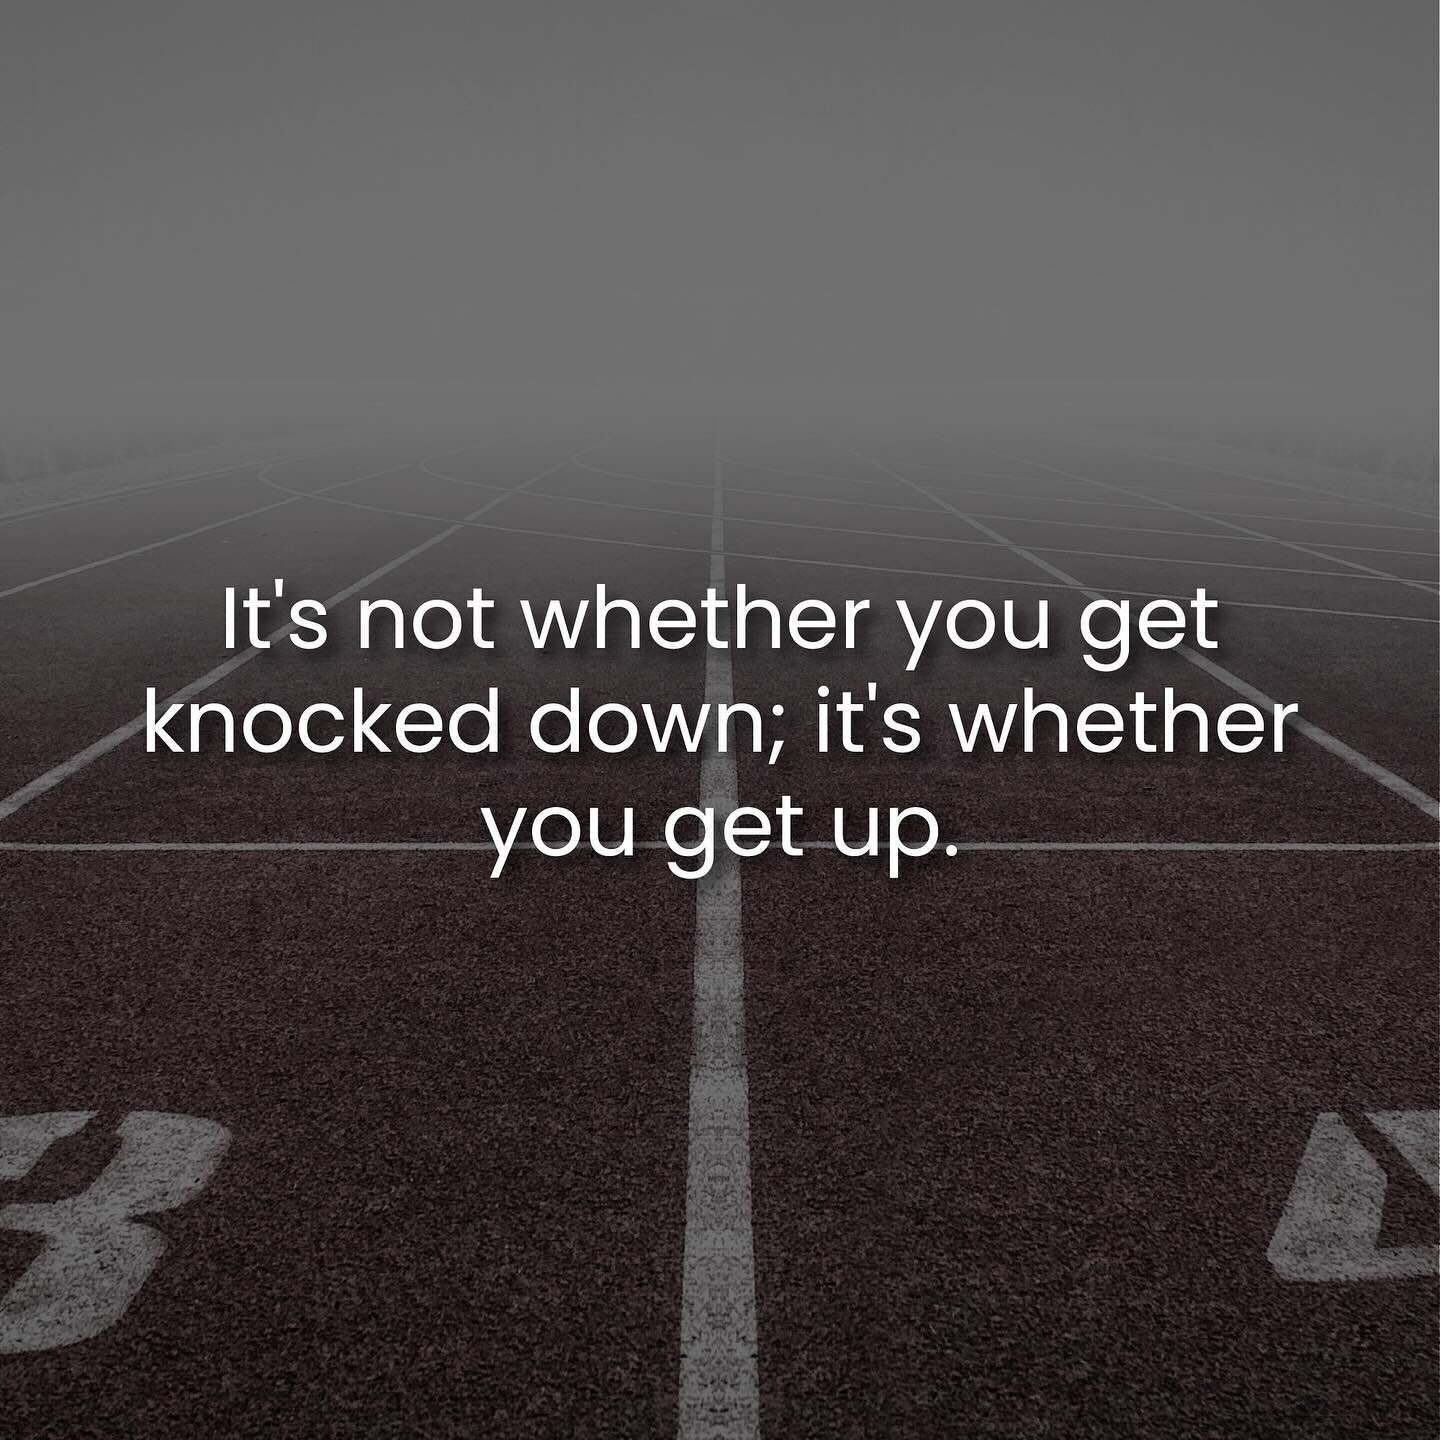 It's not whether you get knocked down; it's whether you get up. #sportsmindset #winningmindset #moonshot